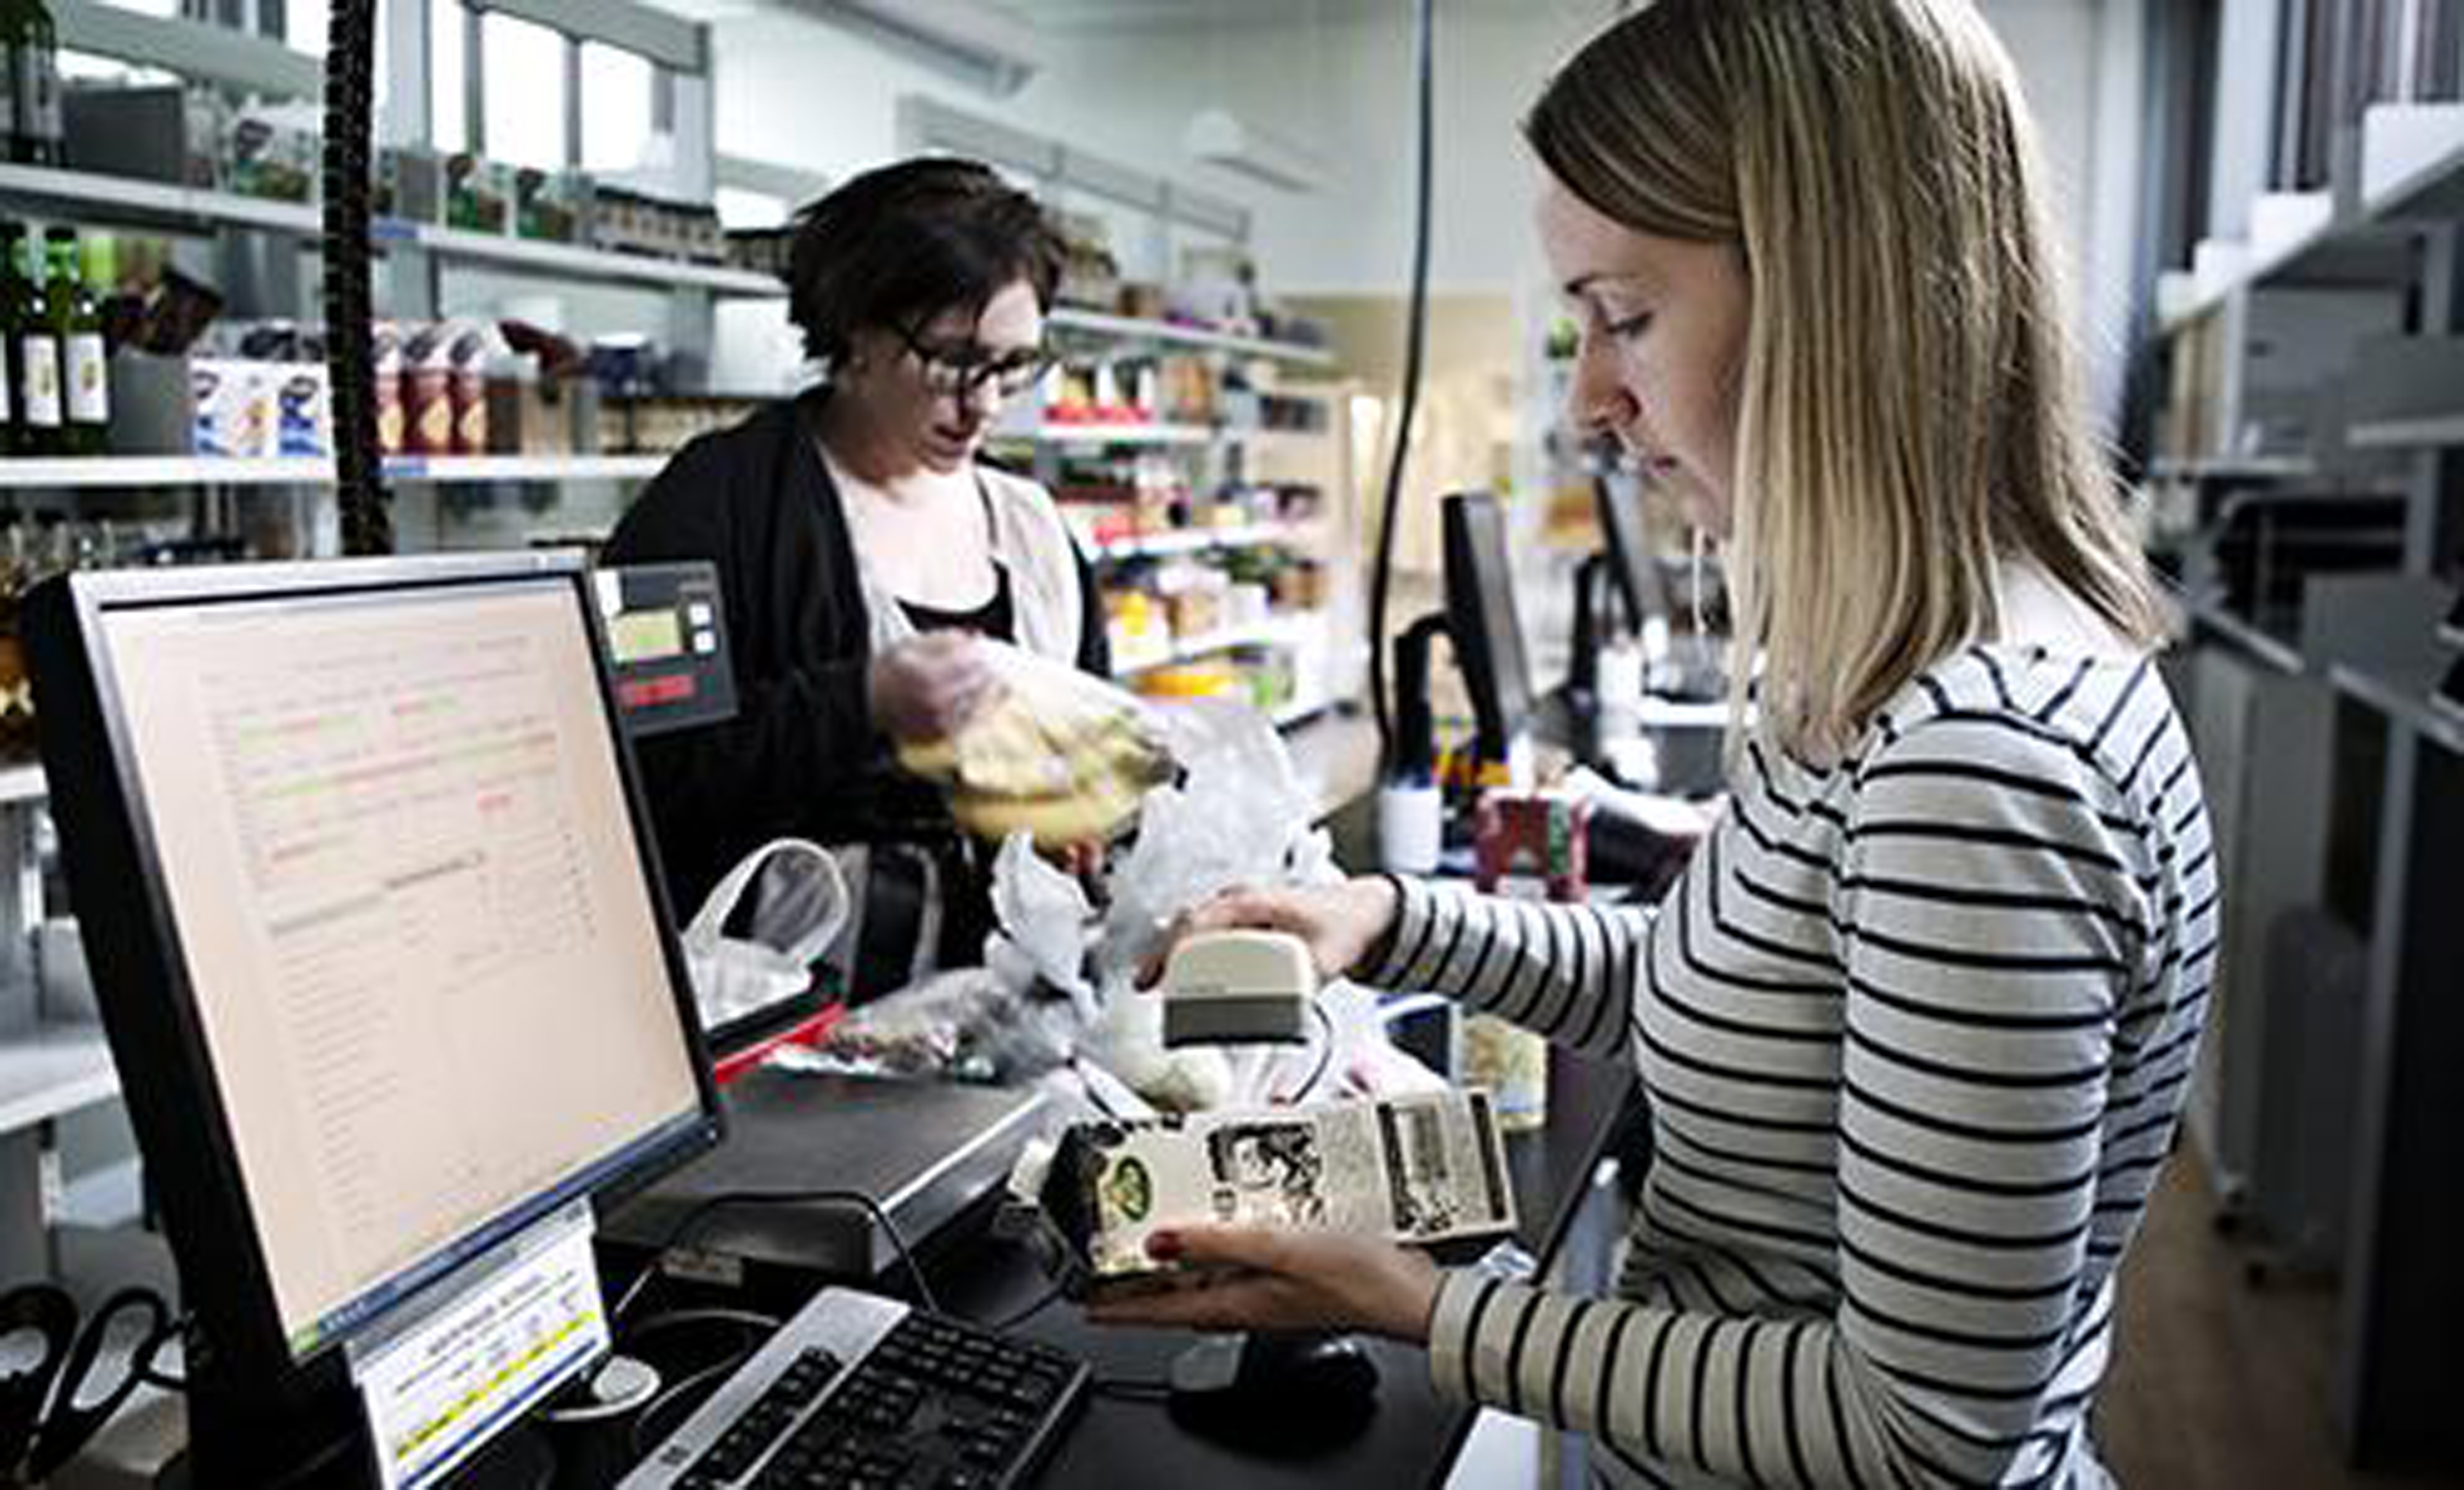 The subjects picking up their food in a scientific supermarket at the University of Copenhagen.